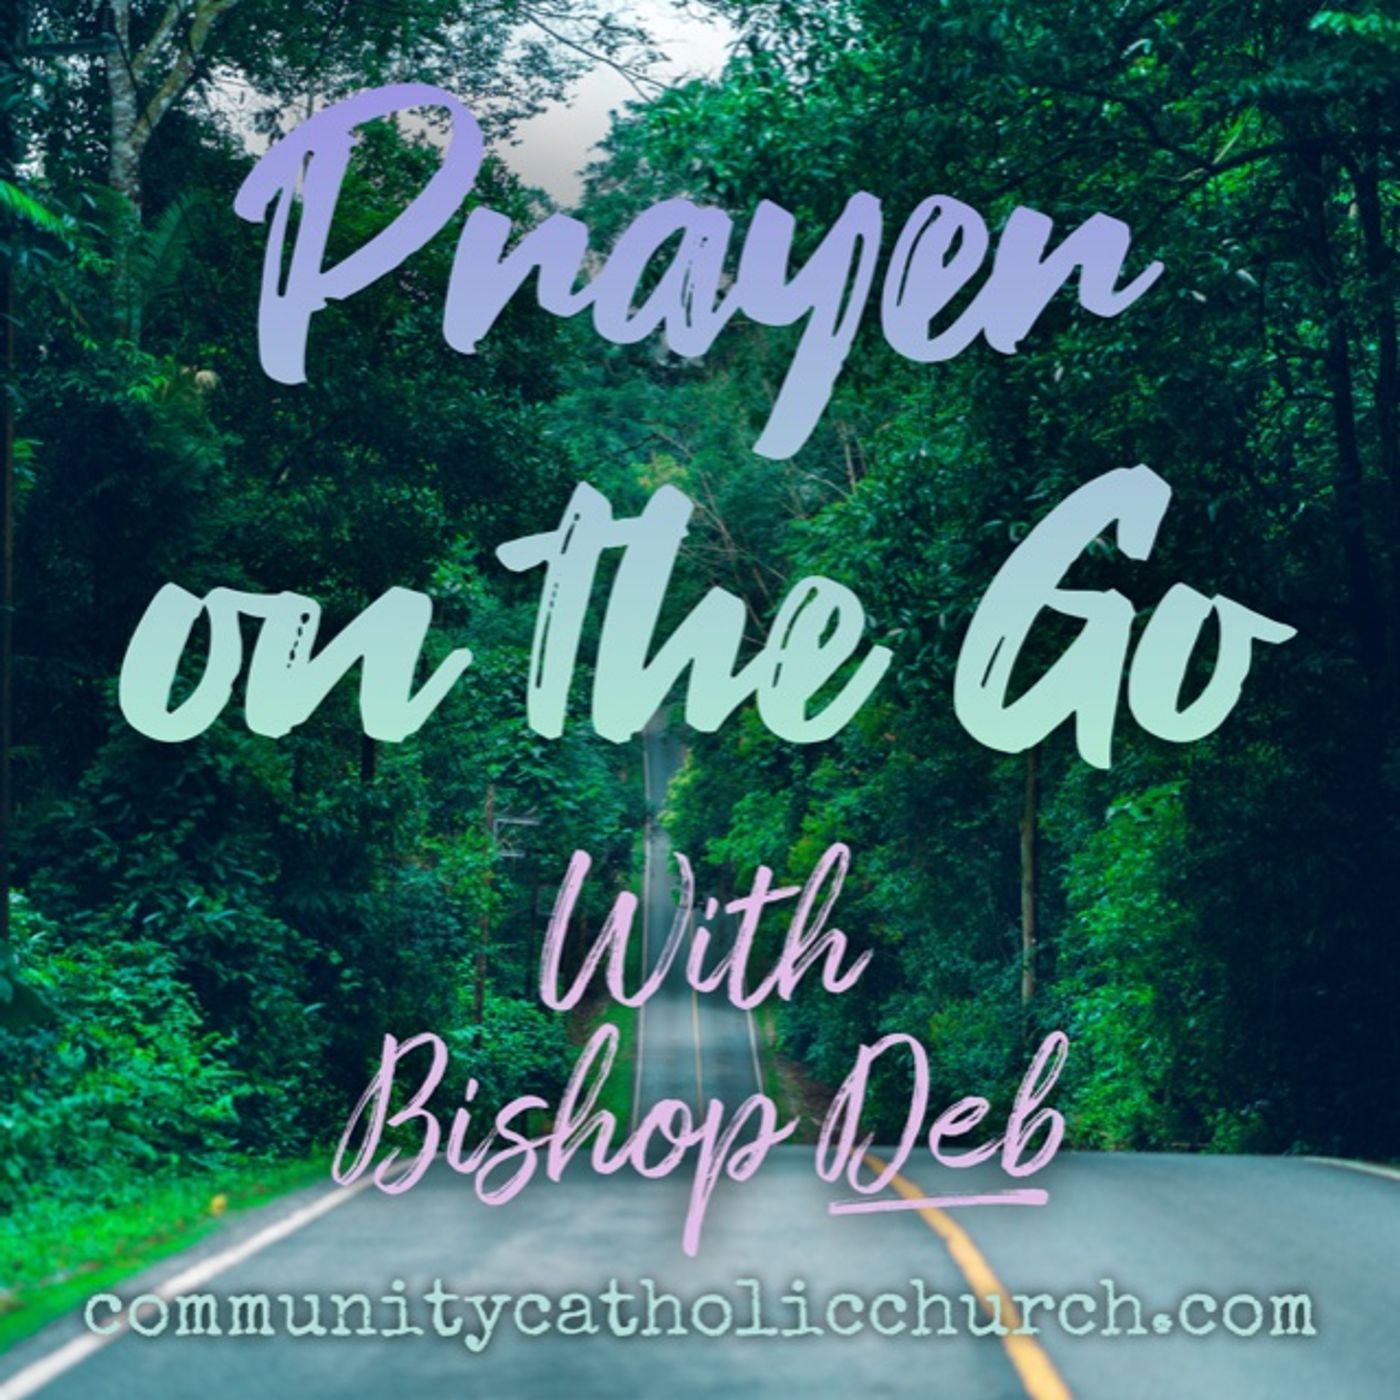 Prayer on the Go! – with Bishop Deb